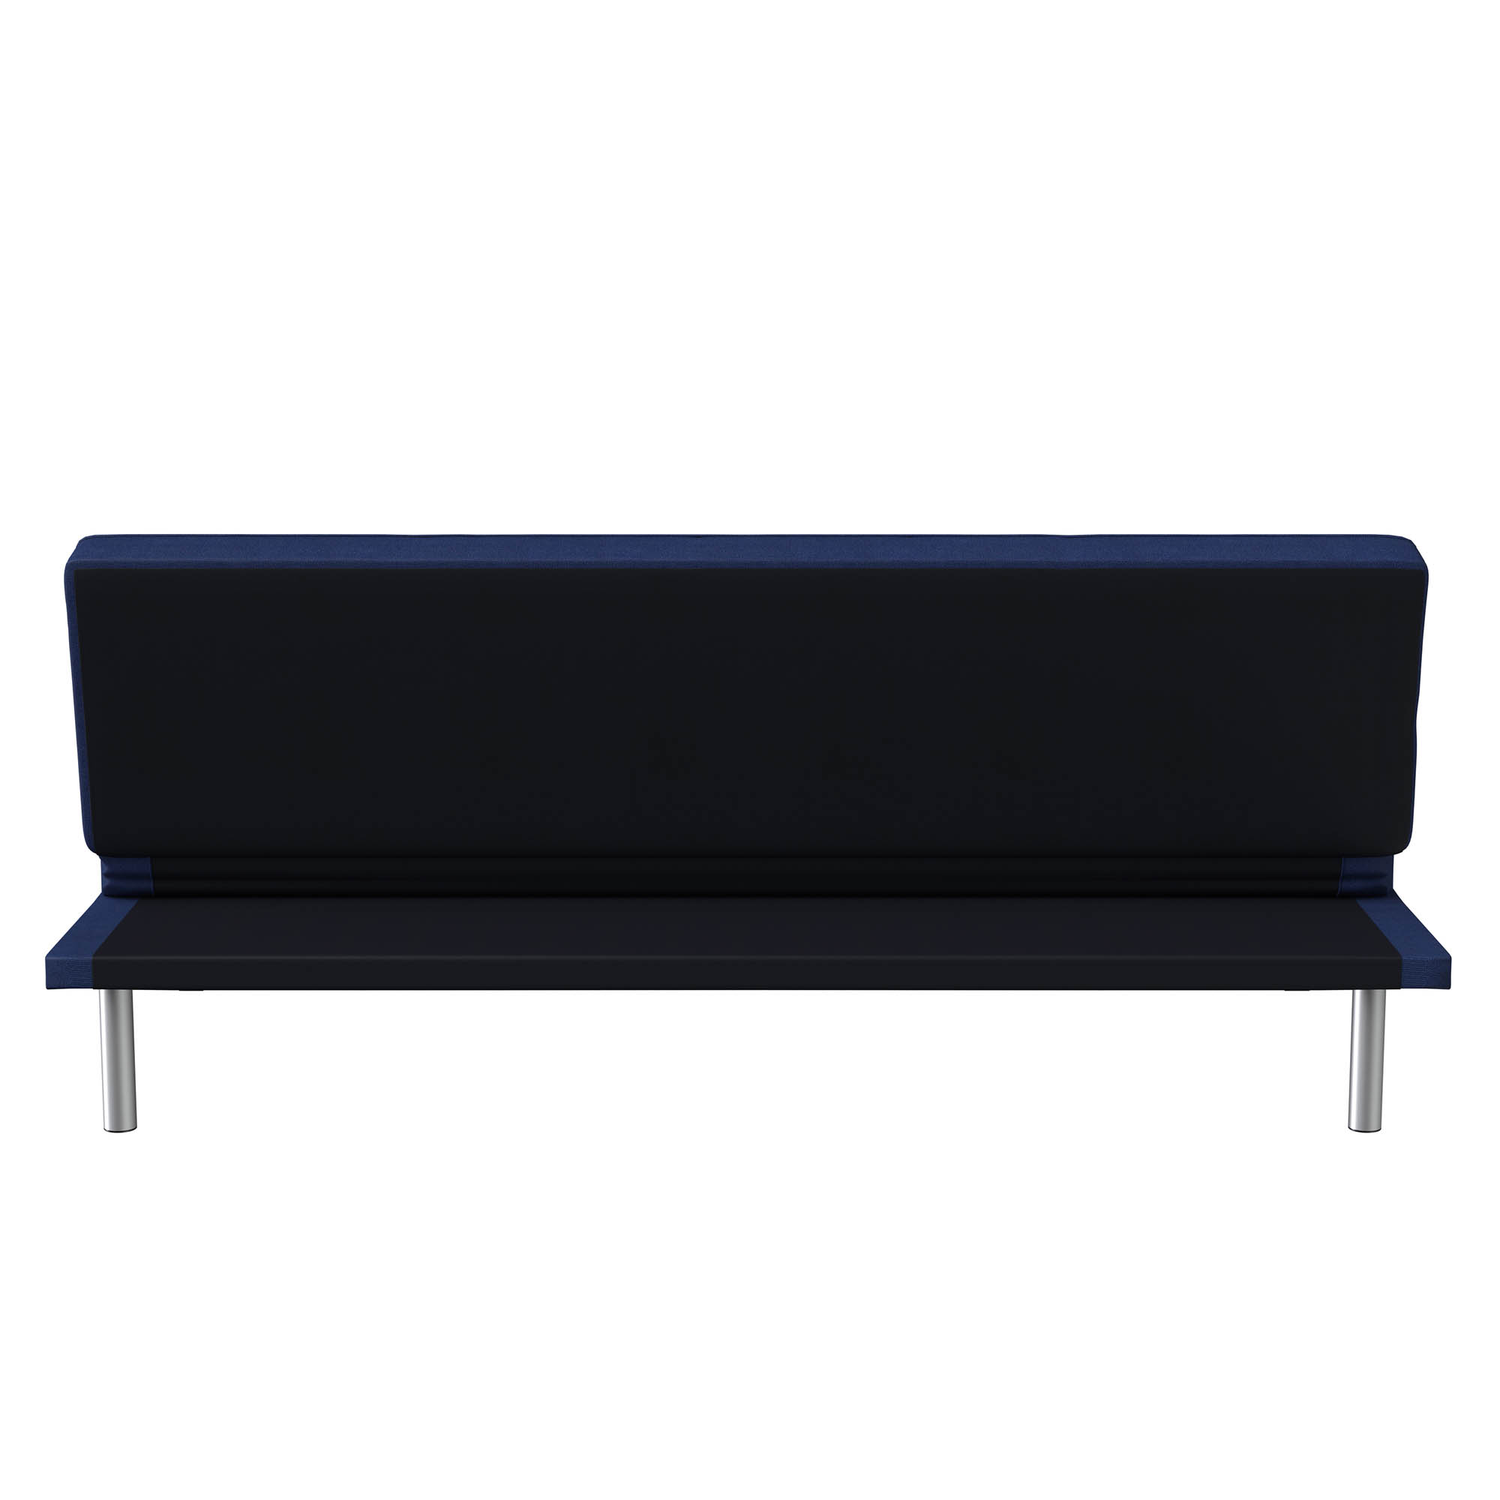 Serta Chelsea Convertible Sofa, Lounger and Full Size Bed, Blue Fabric